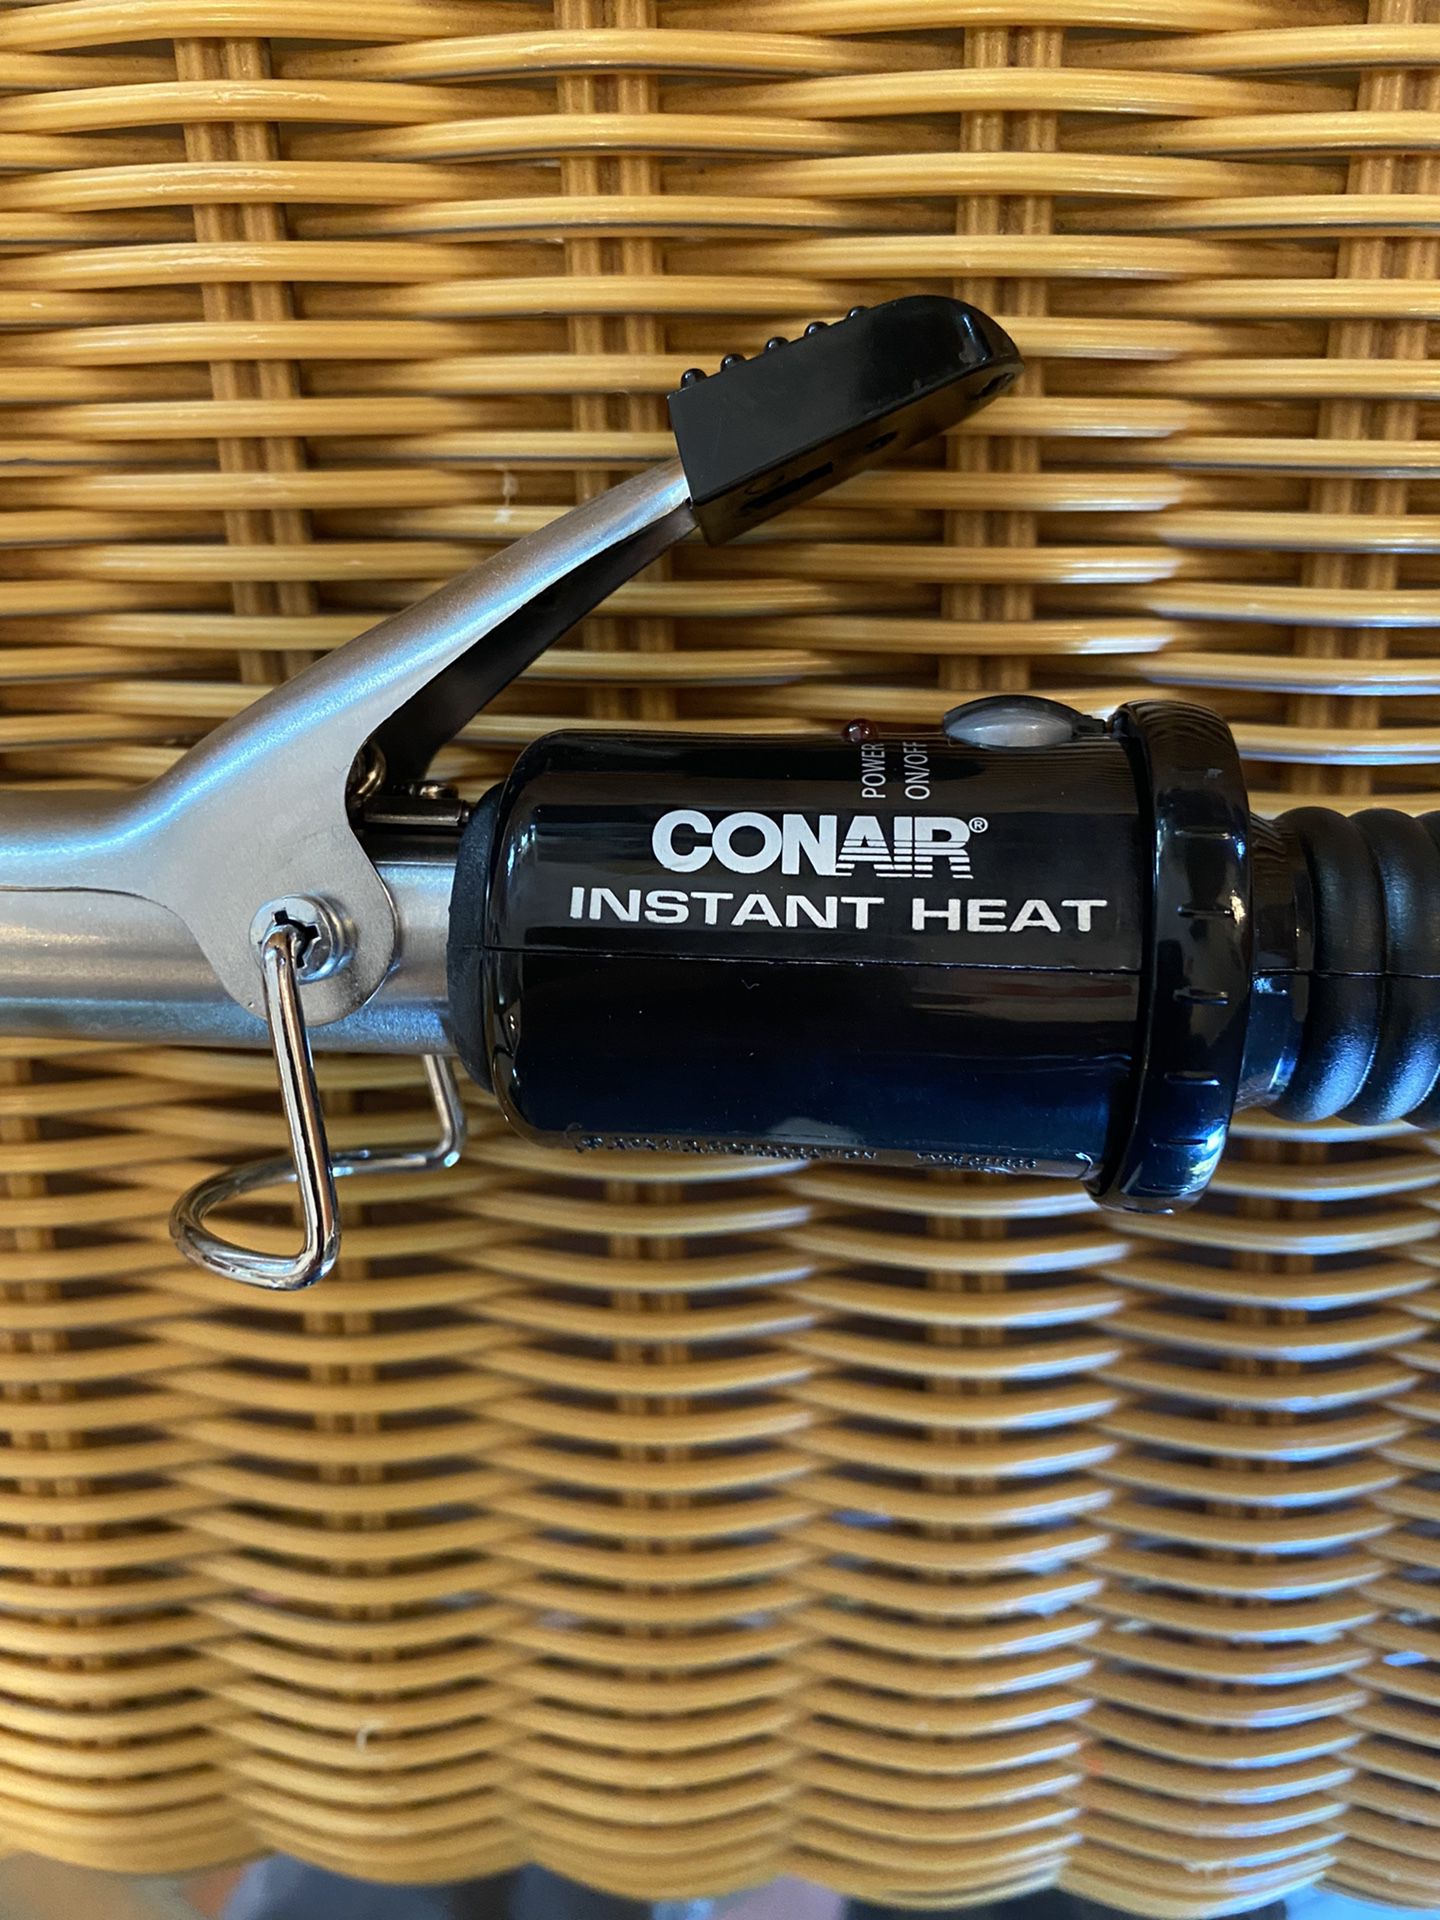 Conair curling iron. 3/4”     Used once maybe?? Or not at all.  Been in storage a few months  SANITIZED